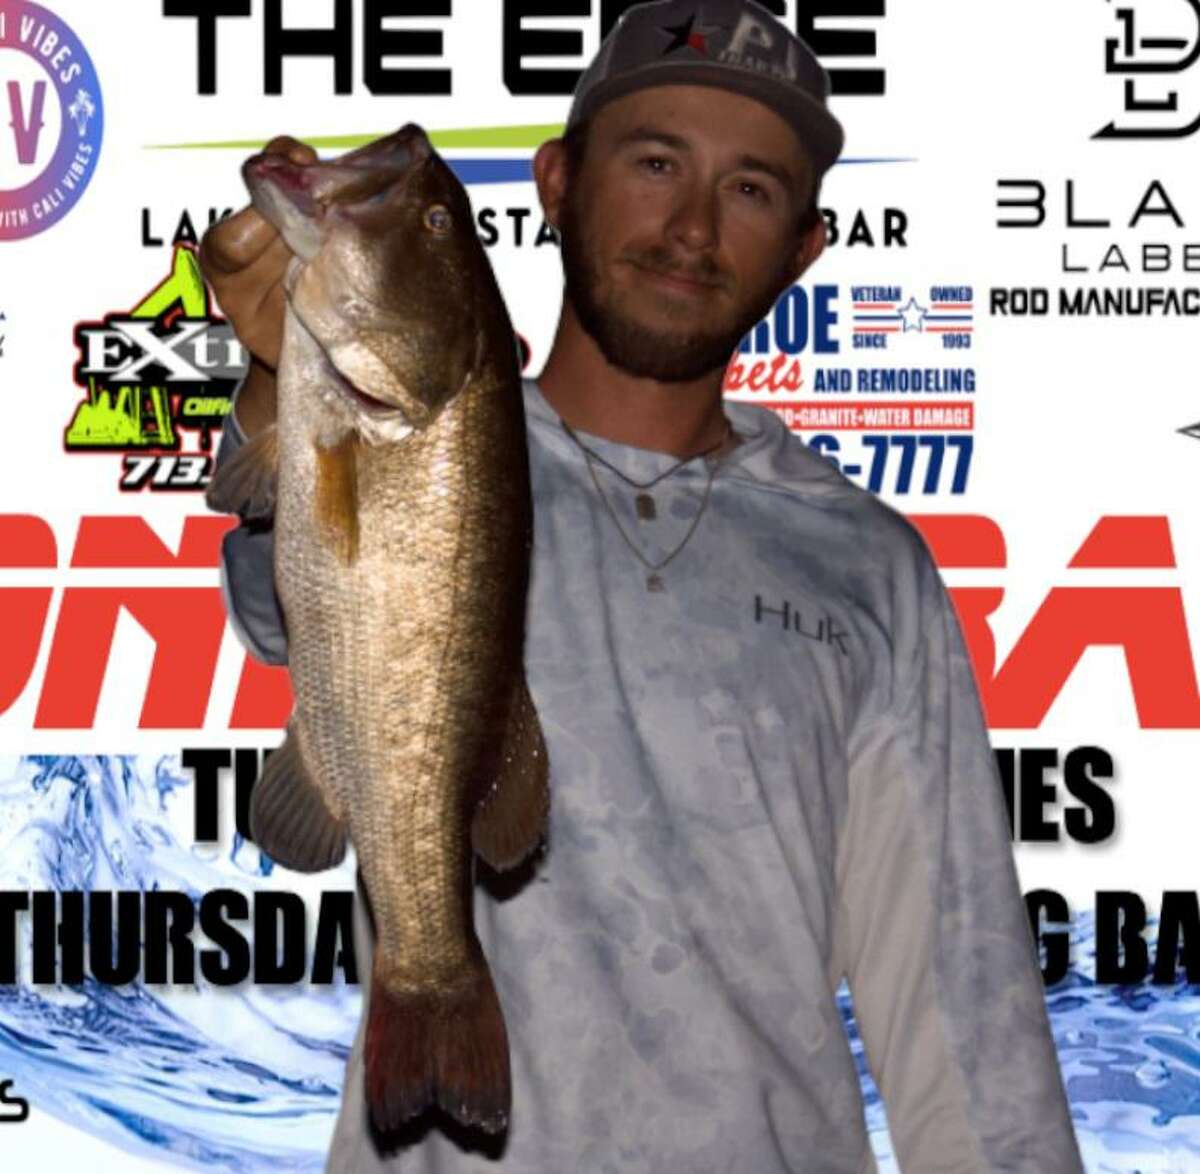 Wesley Baxley had the second place big bass in the CONROEBASS Tuesday Night tournament.